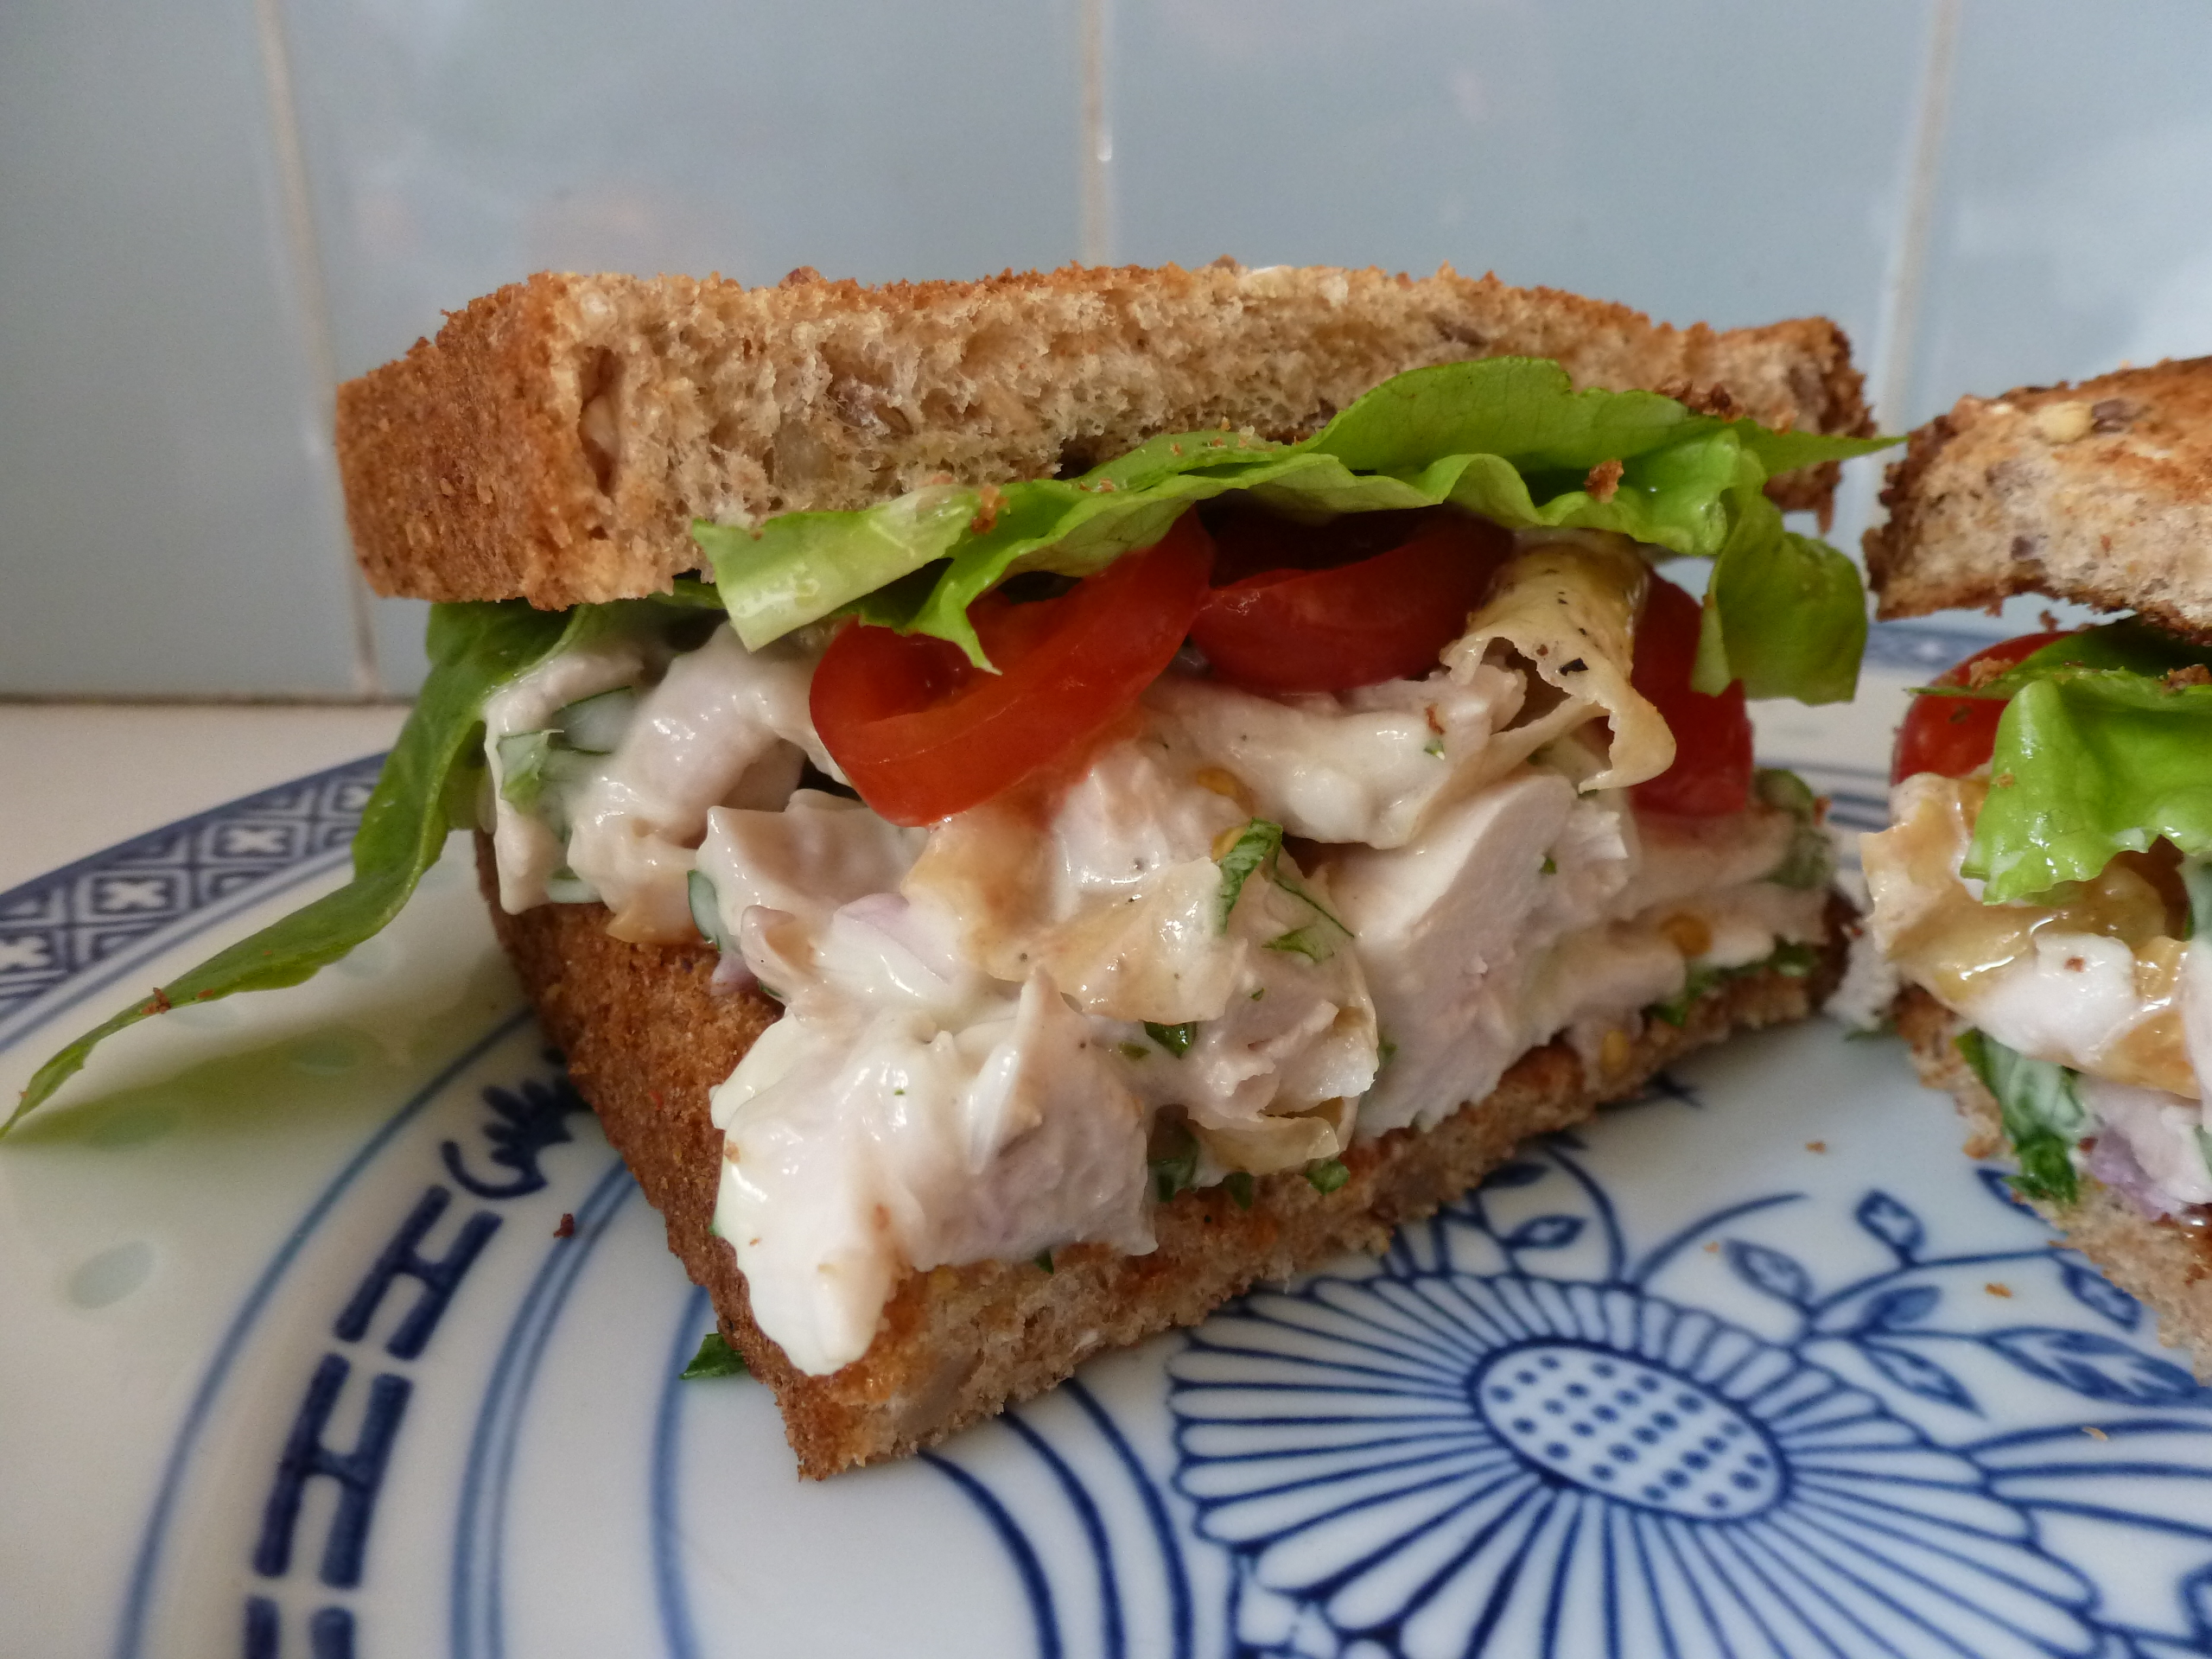 The finished chicken salad on toast, with tomatoes and lettuce